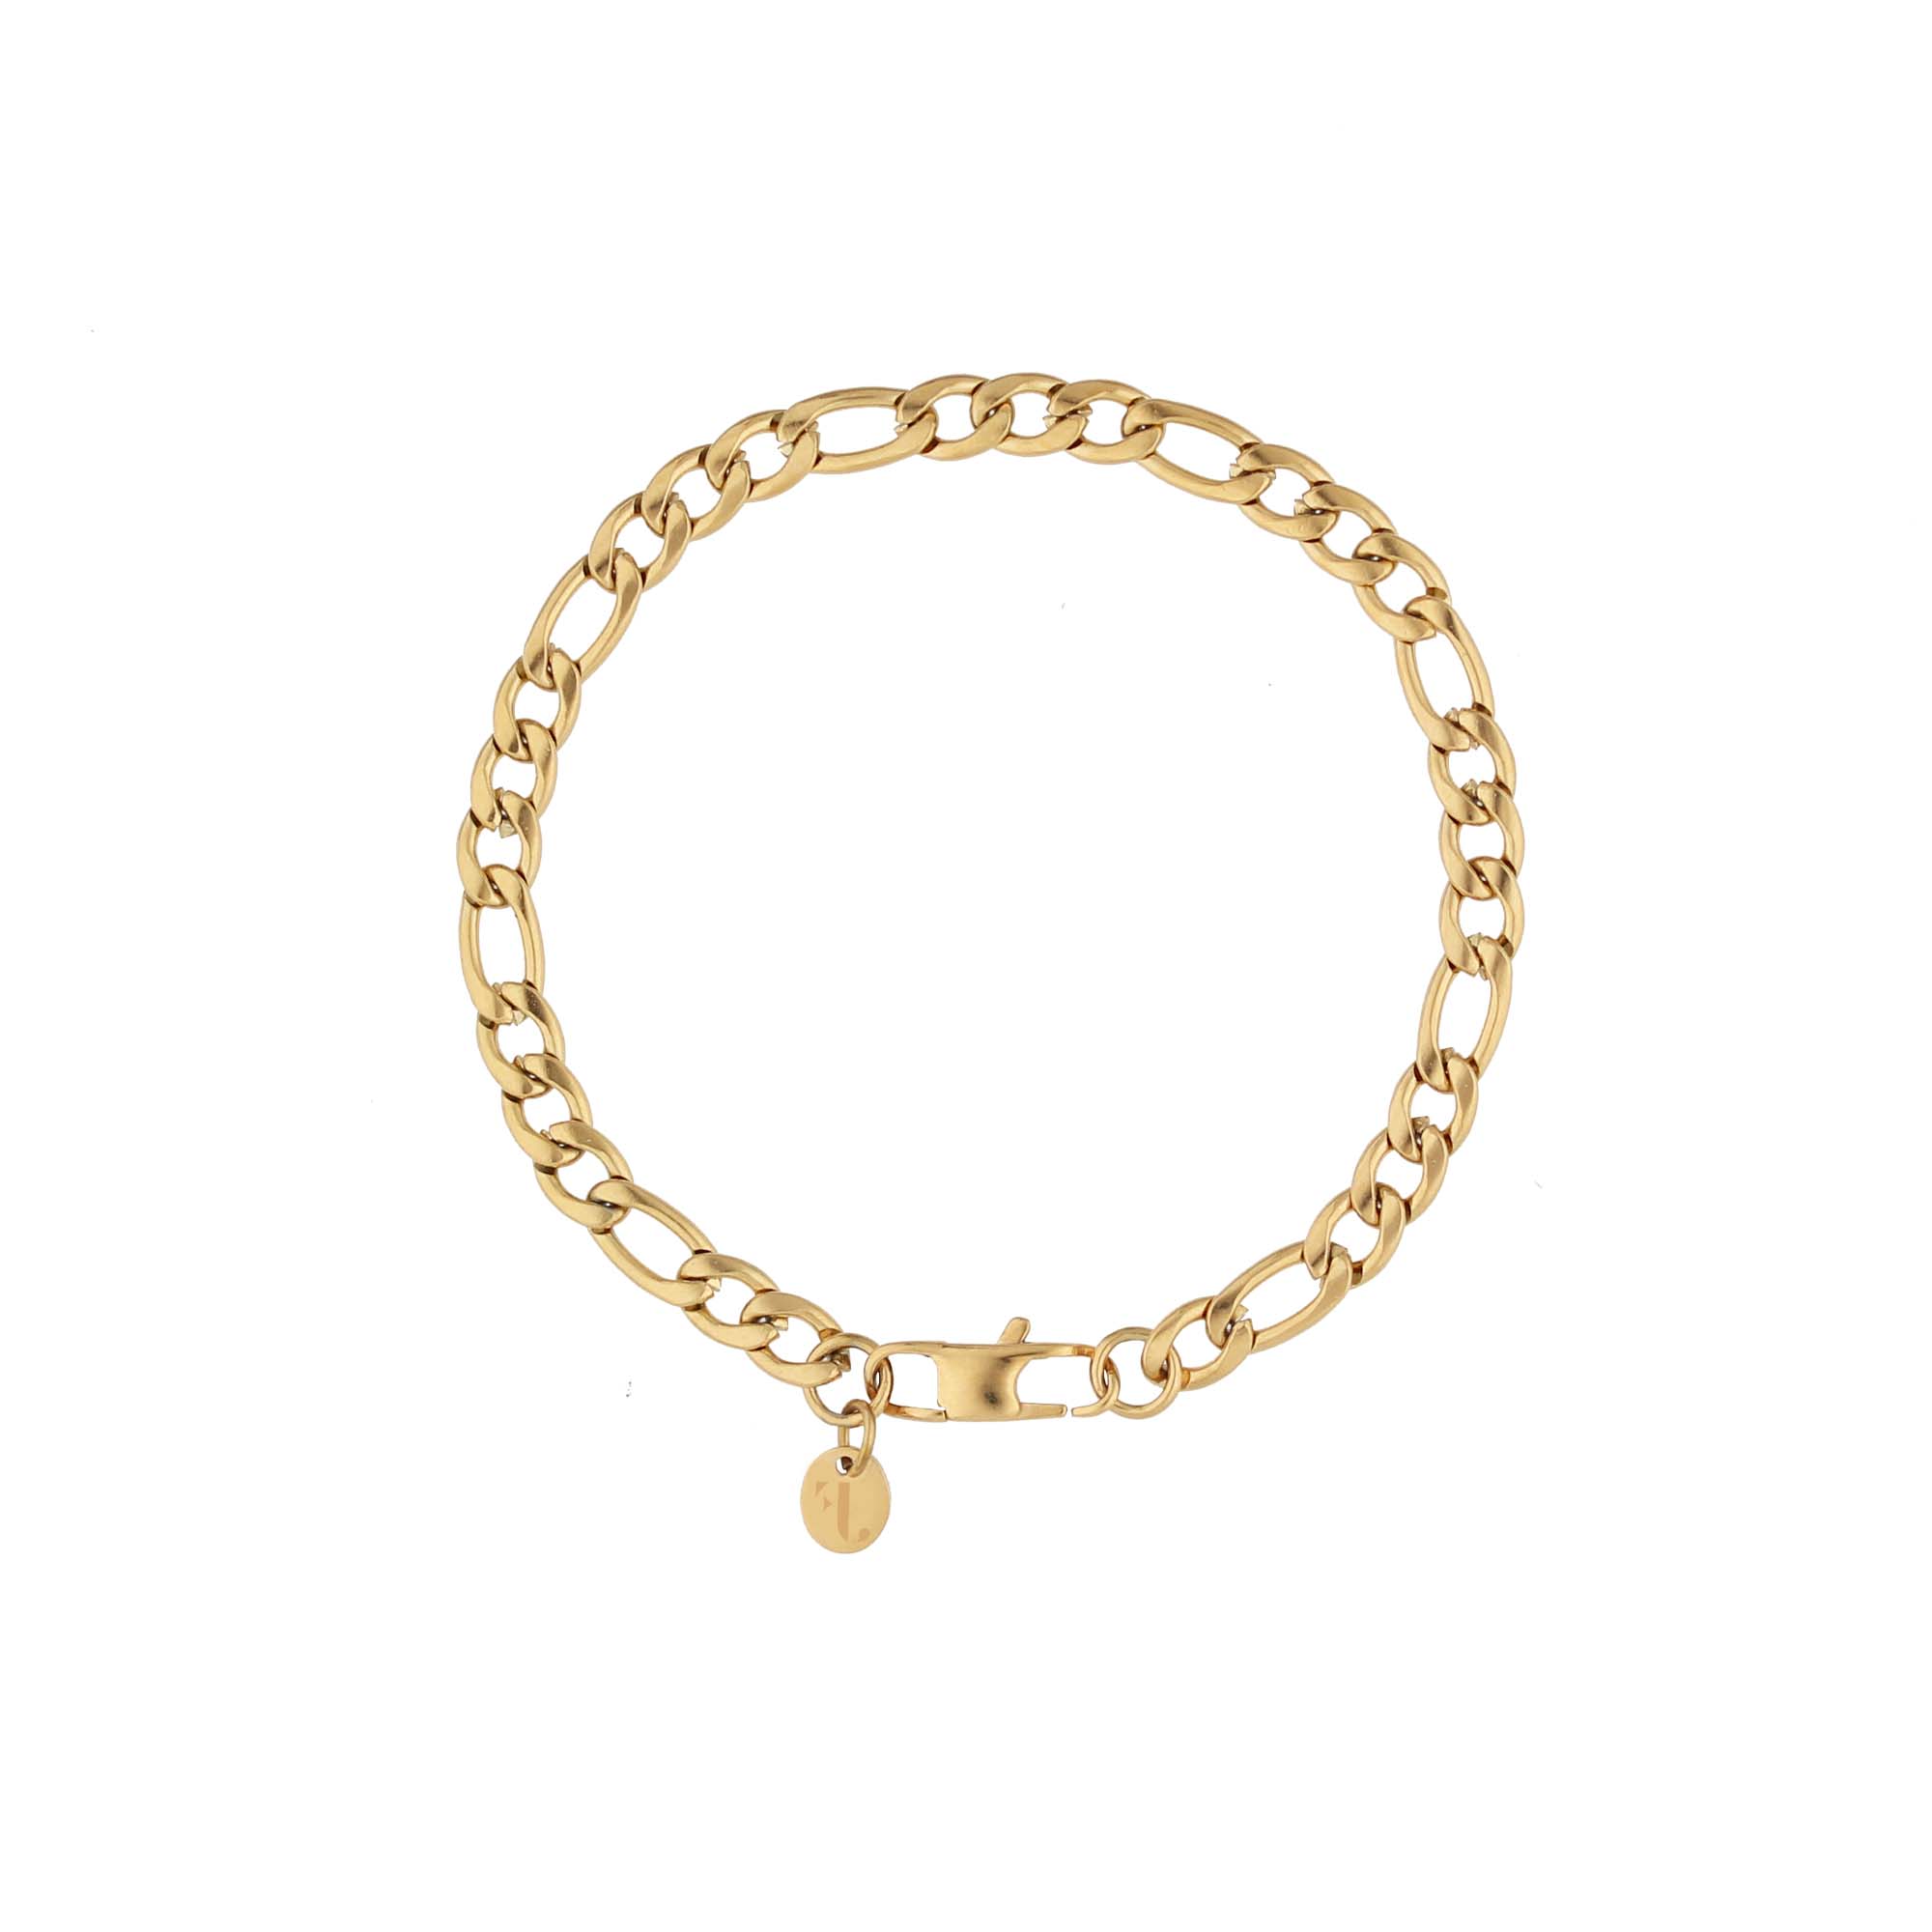 Rhône men's bracelet by Five Jwlry, crafted from a 5mm figaro chain in gold-colored, water-resistant 316L stainless steel. Available in sizes 20cm and 22cm, and hypoallergenic.